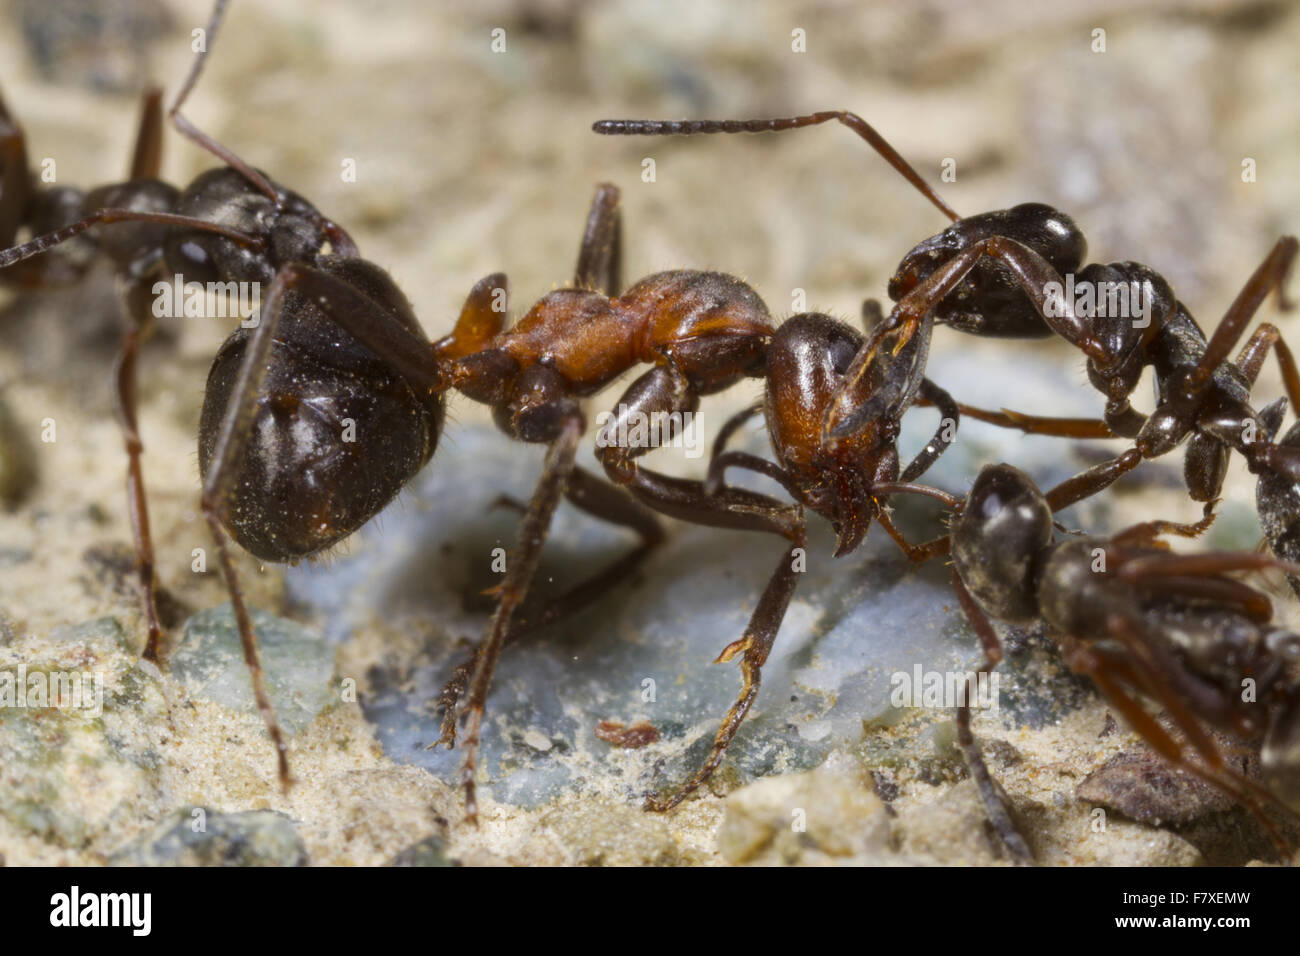 Wood Ant (Formica lemani) adult workers, attacking Hairy Wood Ant (Formica lugubis) adult worker, Shropshire, England, April Stock Photo